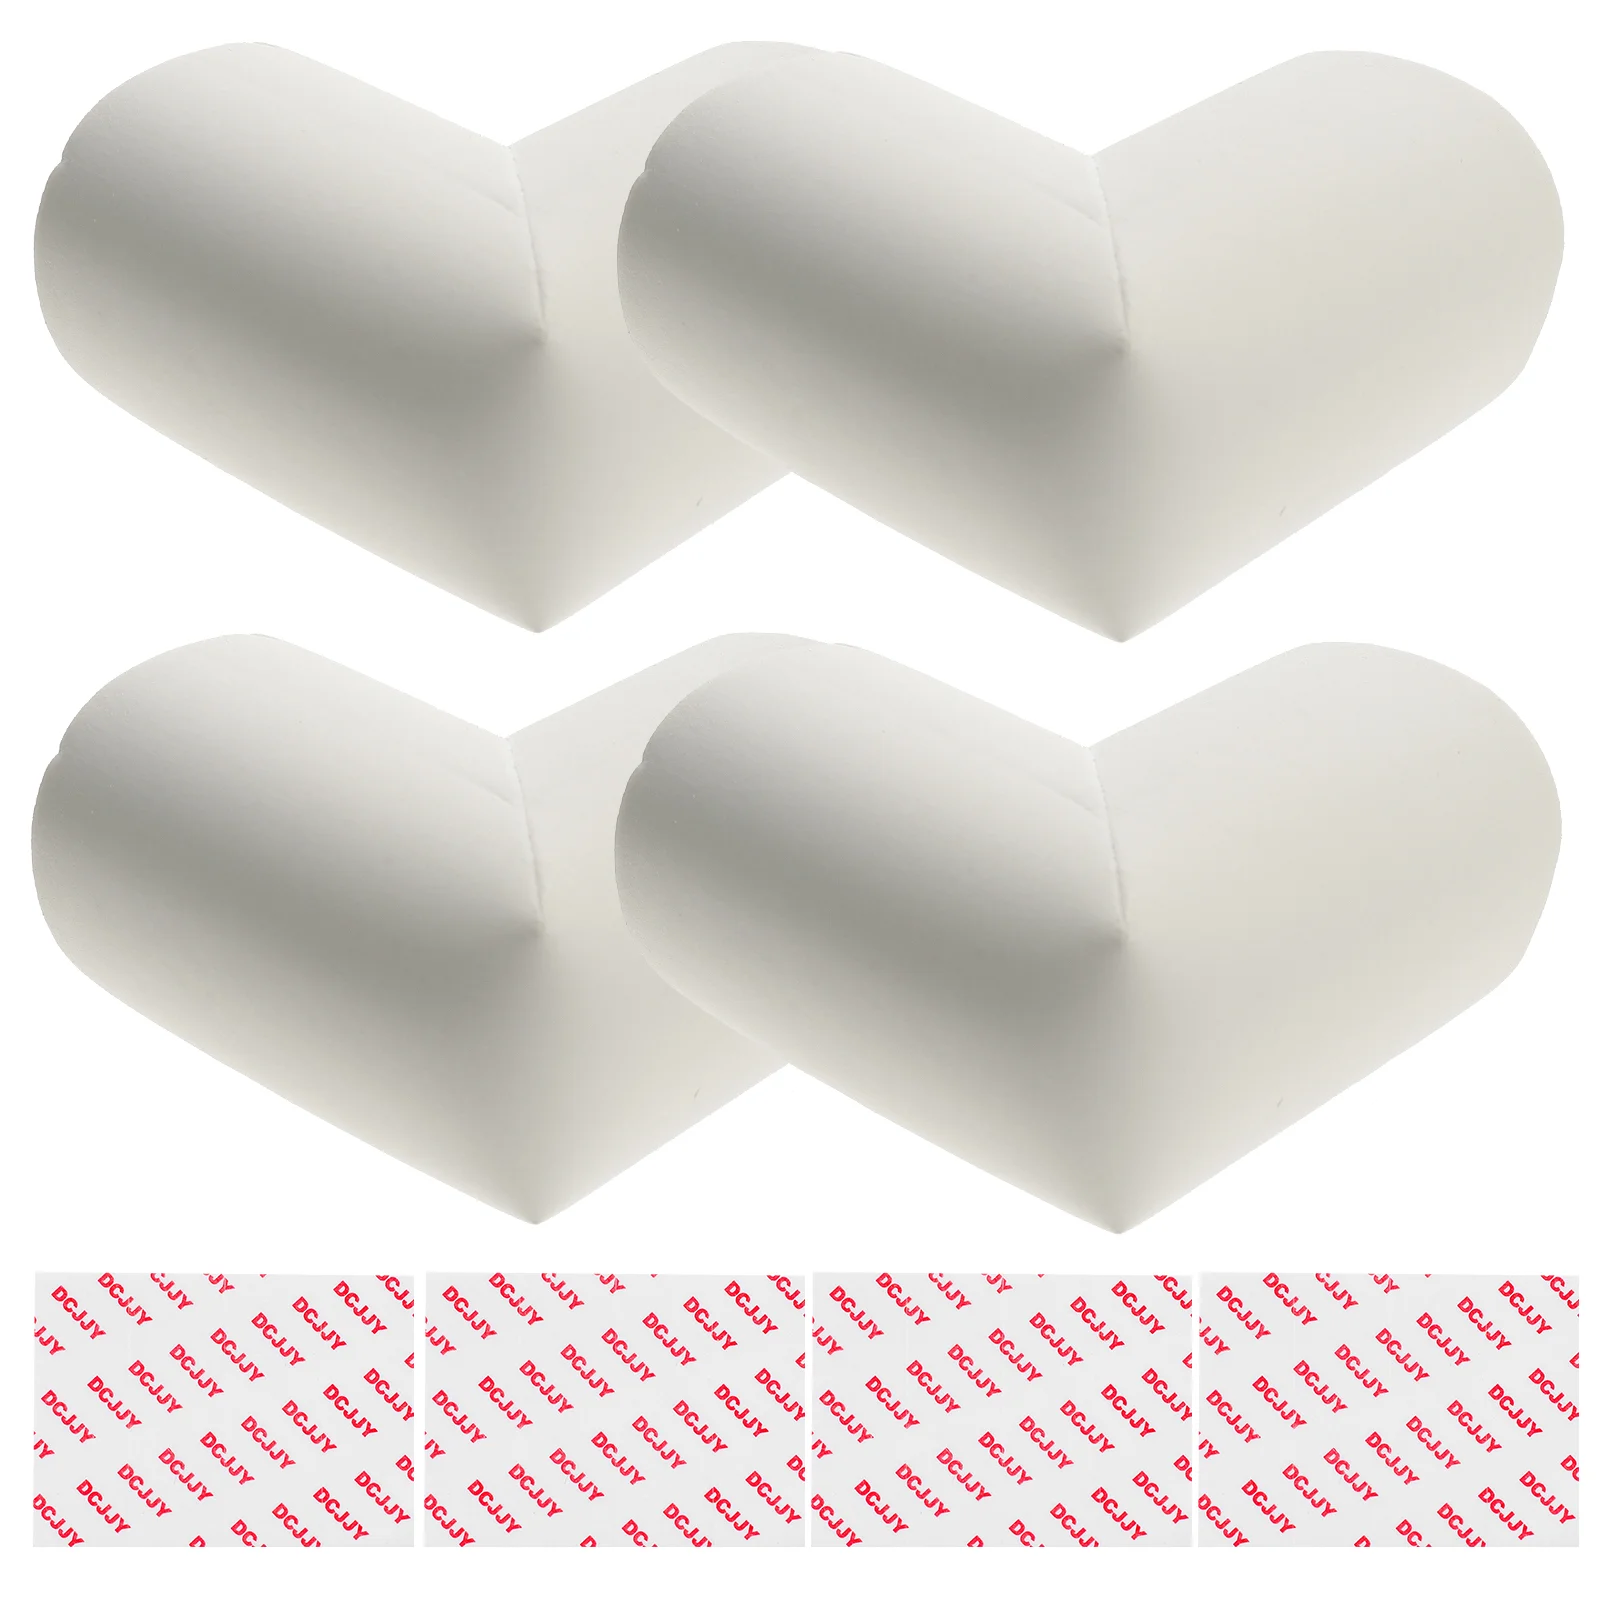 

4 Pcs L-shaped Anti-collision Angle Corner Cushions Baby Proof Table Protectors Edge Bumper Guards Rubber Nbr Cabinet